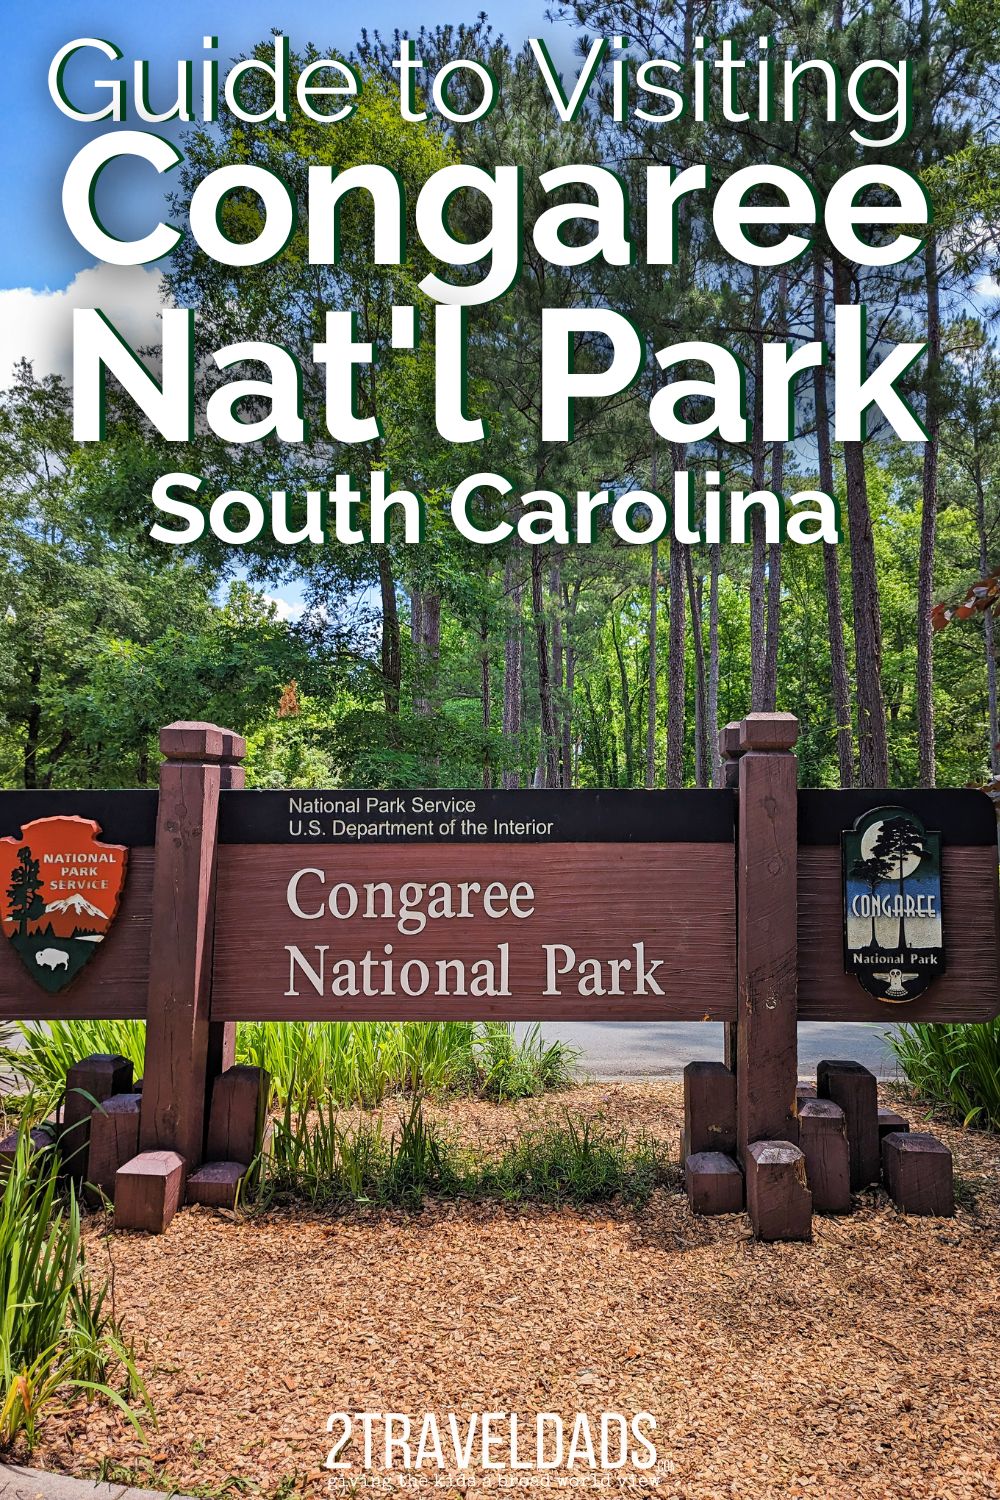 Visiting Congaree National Park is a great addition to any road trip through the Southeast. See all the things to do, how to plan your trip, and the details of observing the synchronous fireflies here at Congaree NP near Columbia, SC.